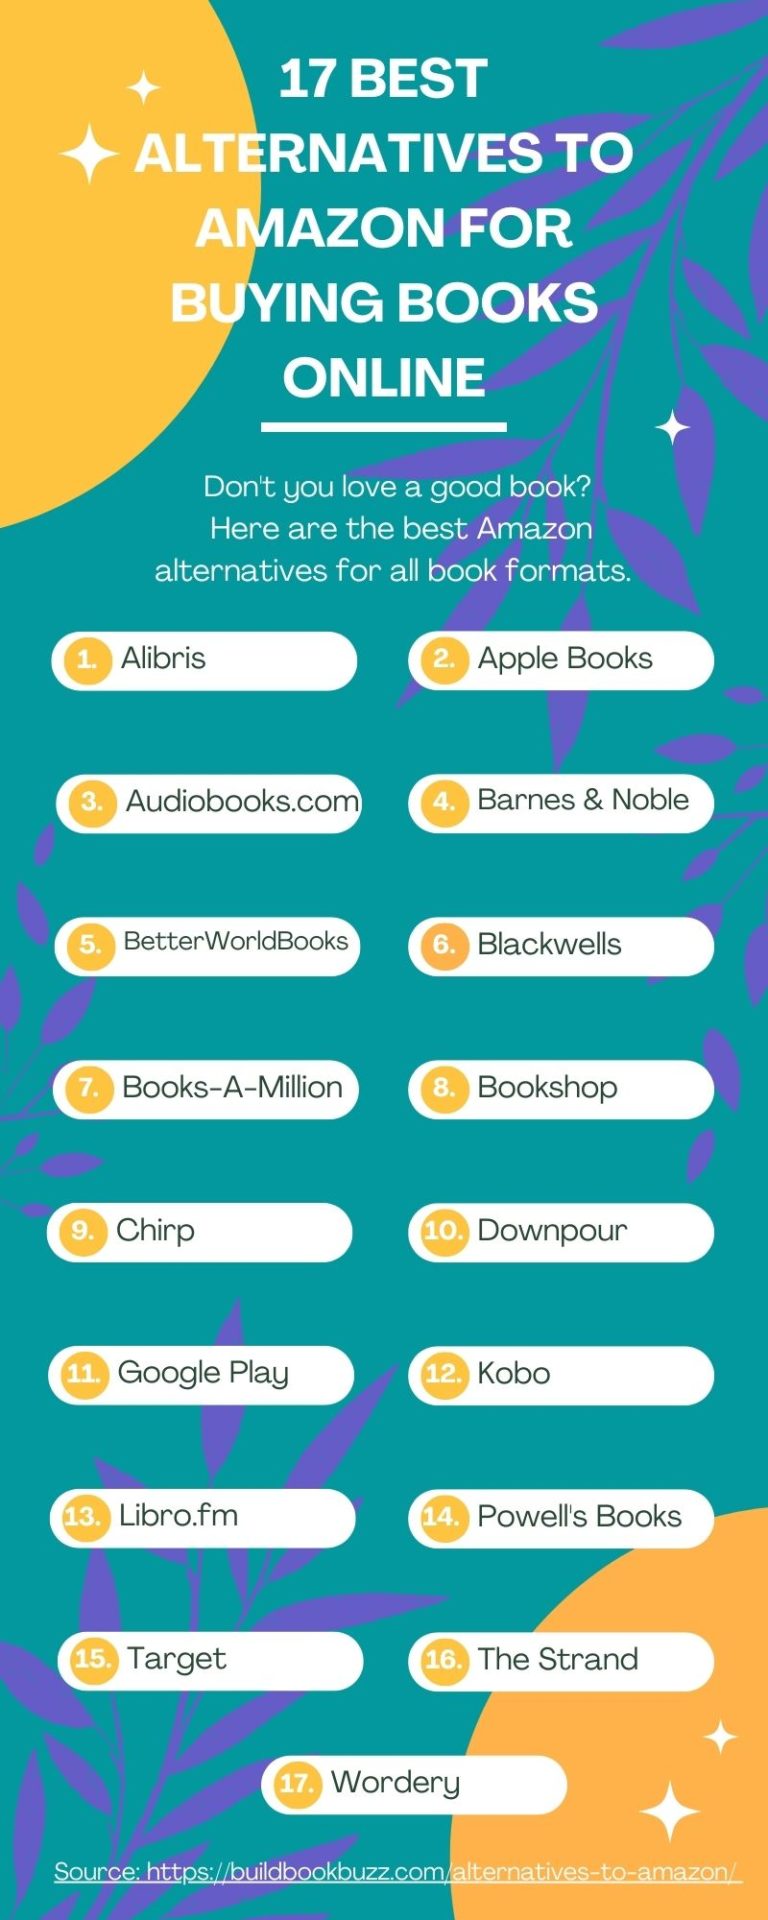 17 Best Alternatives To Amazon For Buying Books Online 768x1920 